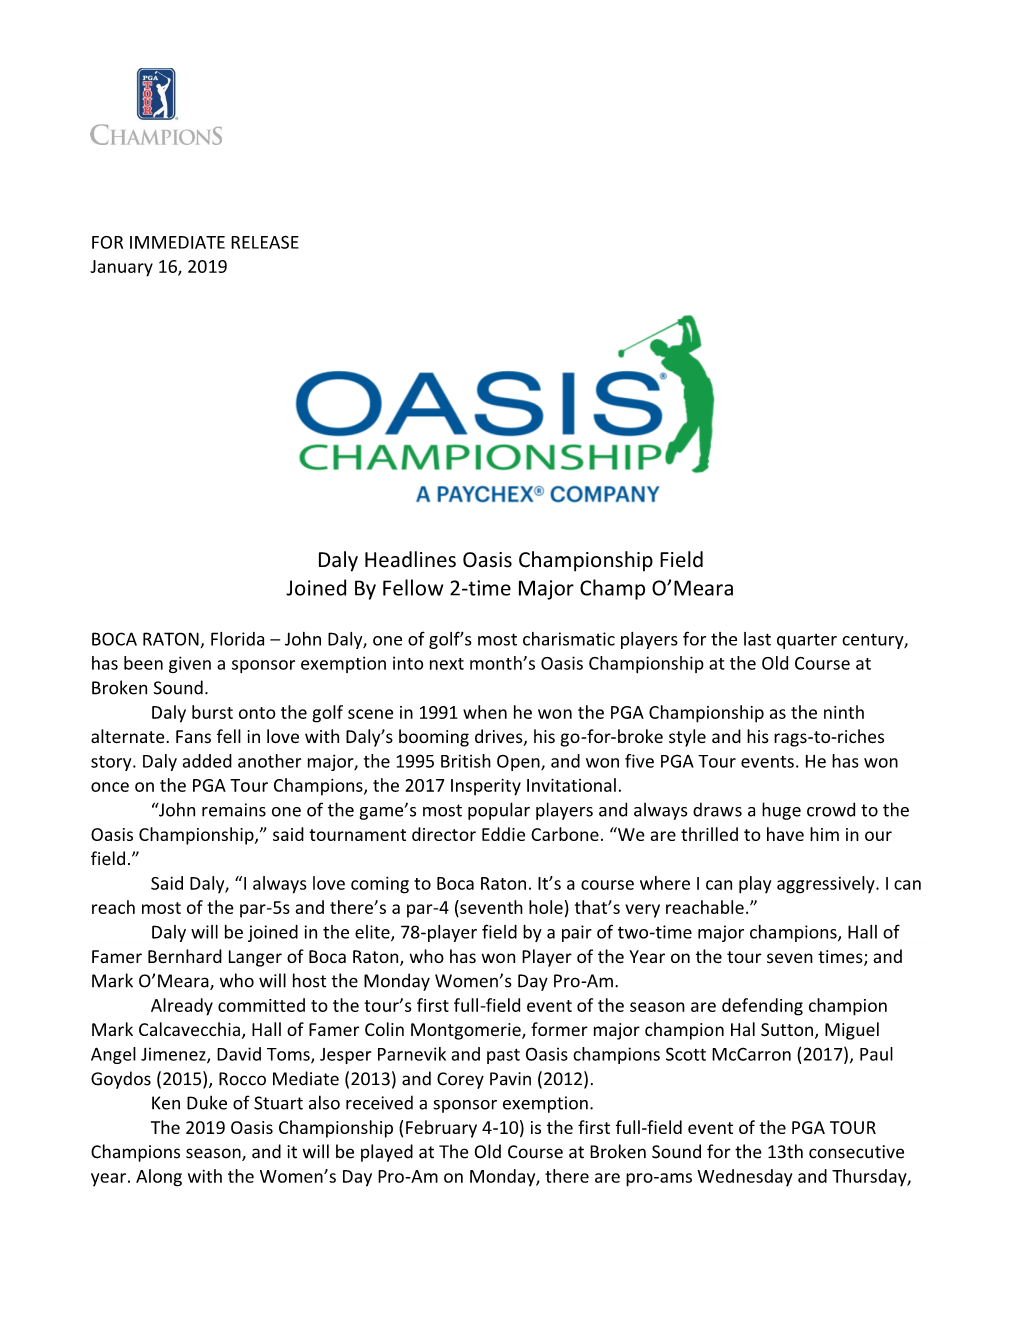 Daly Headlines Oasis Championship Field Joined by Fellow 2-Time Major Champ O'meara